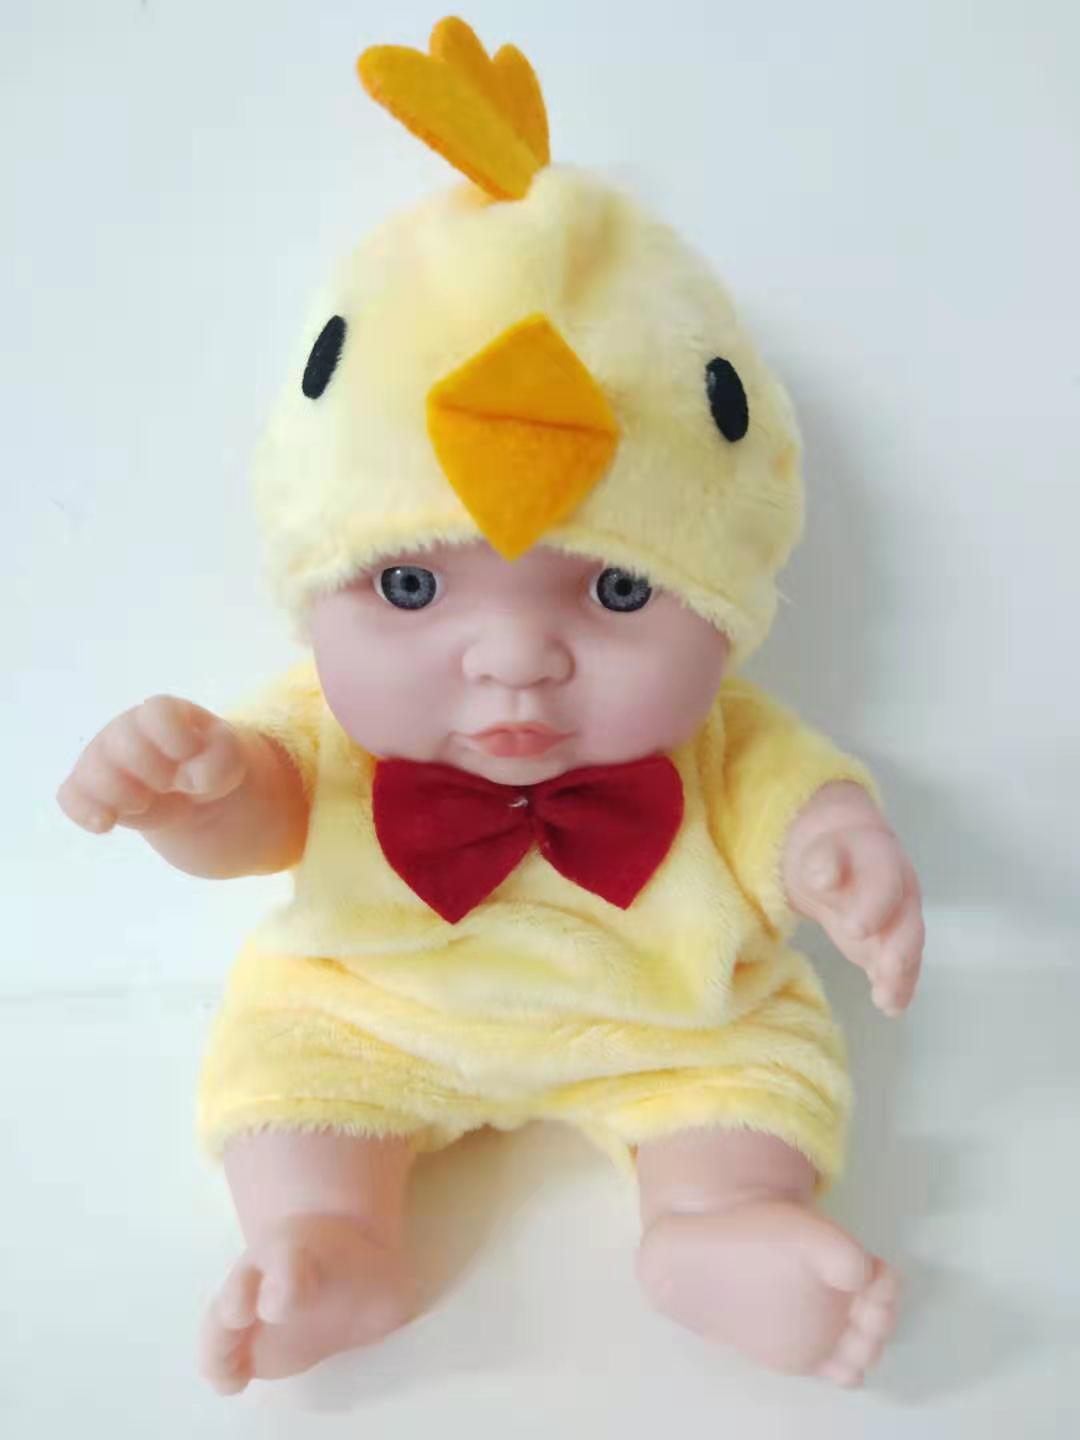 18002Cute baby doll toys for kids